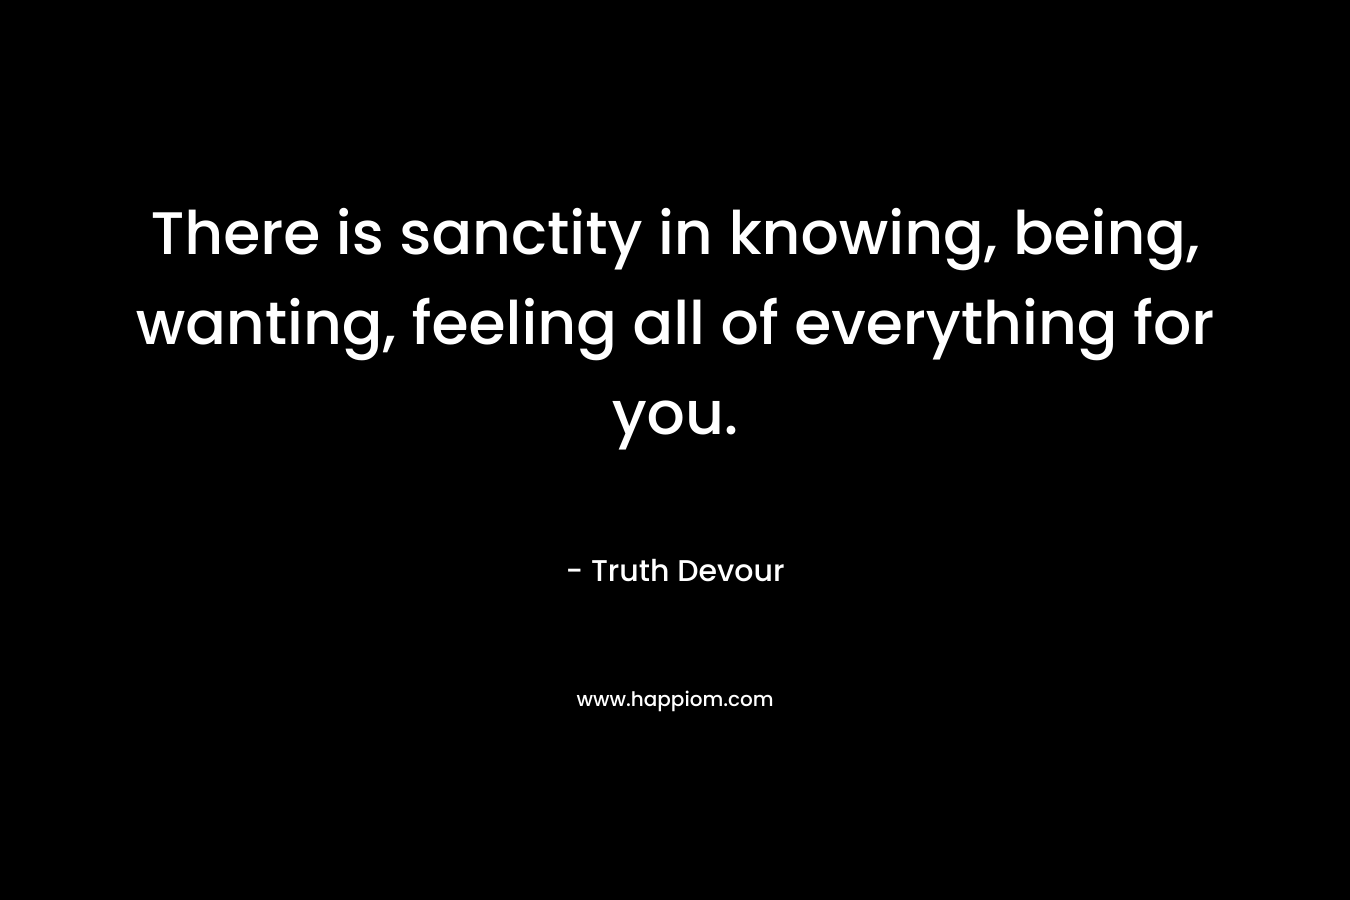 There is sanctity in knowing, being, wanting, feeling all of everything for you. – Truth Devour